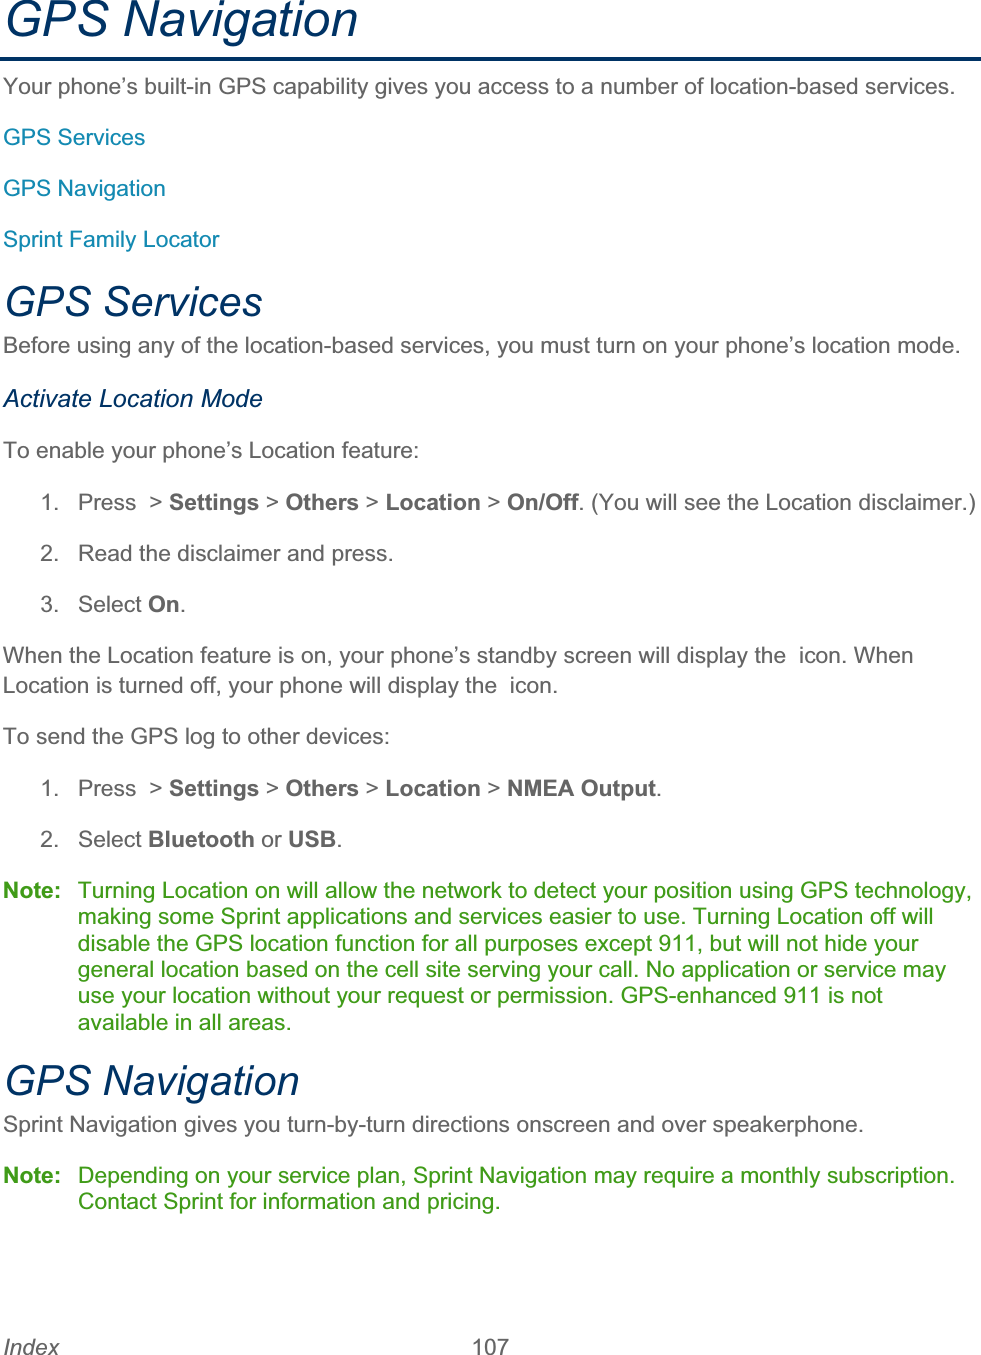 Index 107   GPS Navigation Your phone’s built-in GPS capability gives you access to a number of location-based services. GPS Services GPS Navigation Sprint Family Locator GPS Services Before using any of the location-based services, you must turn on your phone’s location mode. Activate Location Mode To enable your phone’s Location feature: 1. Press &gt; Settings &gt; Others &gt; Location &gt; On/Off. (You will see the Location disclaimer.) 2.  Read the disclaimer and press. 3. Select On.When the Location feature is on, your phone’s standby screen will display the  icon. When Location is turned off, your phone will display the  icon. To send the GPS log to other devices: 1.  Press  &gt; Settings &gt; Others &gt; Location &gt; NMEA Output.2. Select Bluetooth or USB.Note:  Turning Location on will allow the network to detect your position using GPS technology, making some Sprint applications and services easier to use. Turning Location off will disable the GPS location function for all purposes except 911, but will not hide your general location based on the cell site serving your call. No application or service may use your location without your request or permission. GPS-enhanced 911 is not available in all areas. GPS Navigation Sprint Navigation gives you turn-by-turn directions onscreen and over speakerphone. Note:  Depending on your service plan, Sprint Navigation may require a monthly subscription. Contact Sprint for information and pricing. 